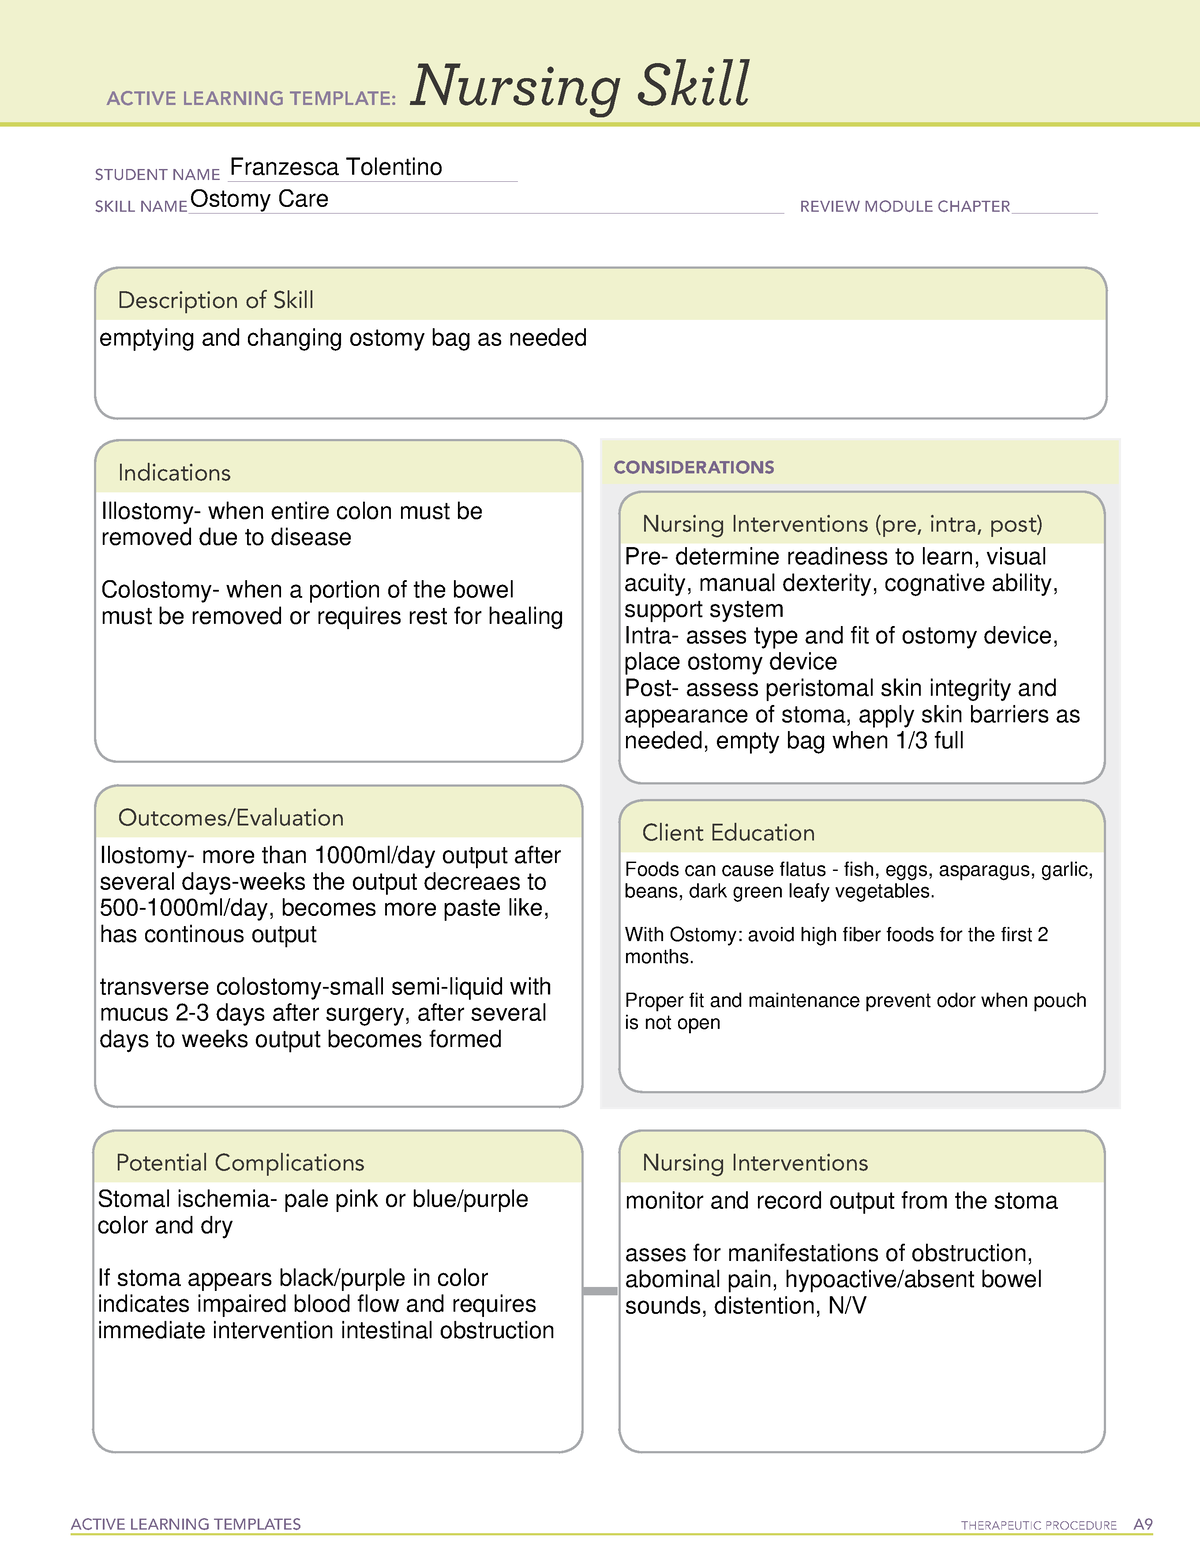 active-learning-template-nursing-skill-form-ostomy-care-active-learning-templates-therapeutic